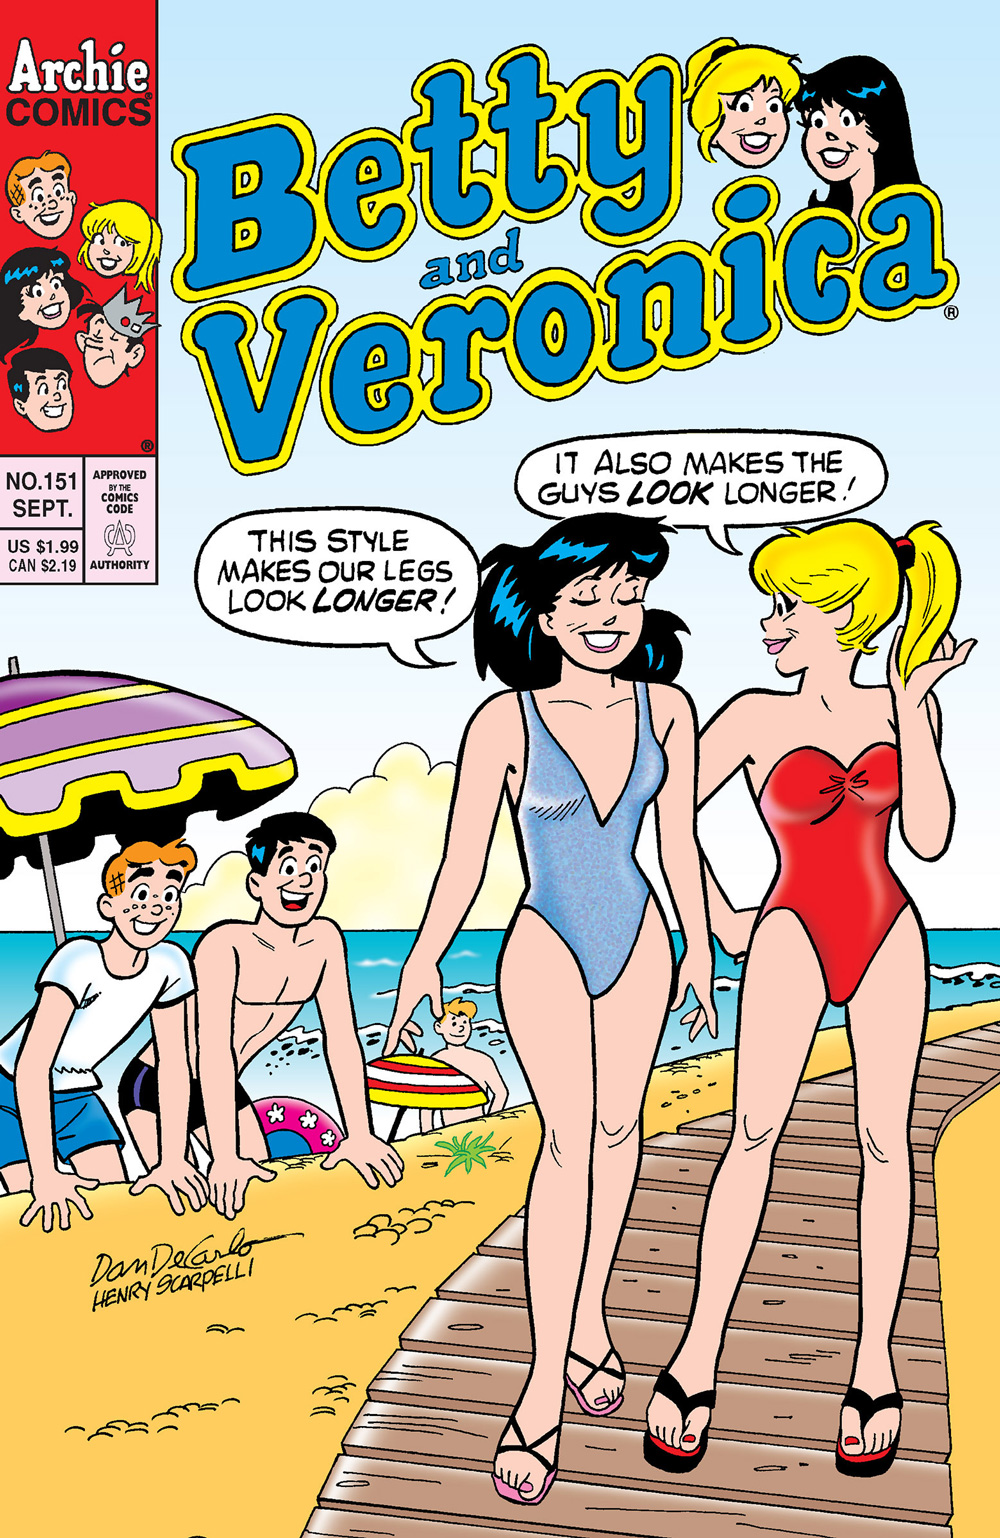 Betty and Veronica are on the beach in swimsuits while Archie and Reggie look on, excited to see them.